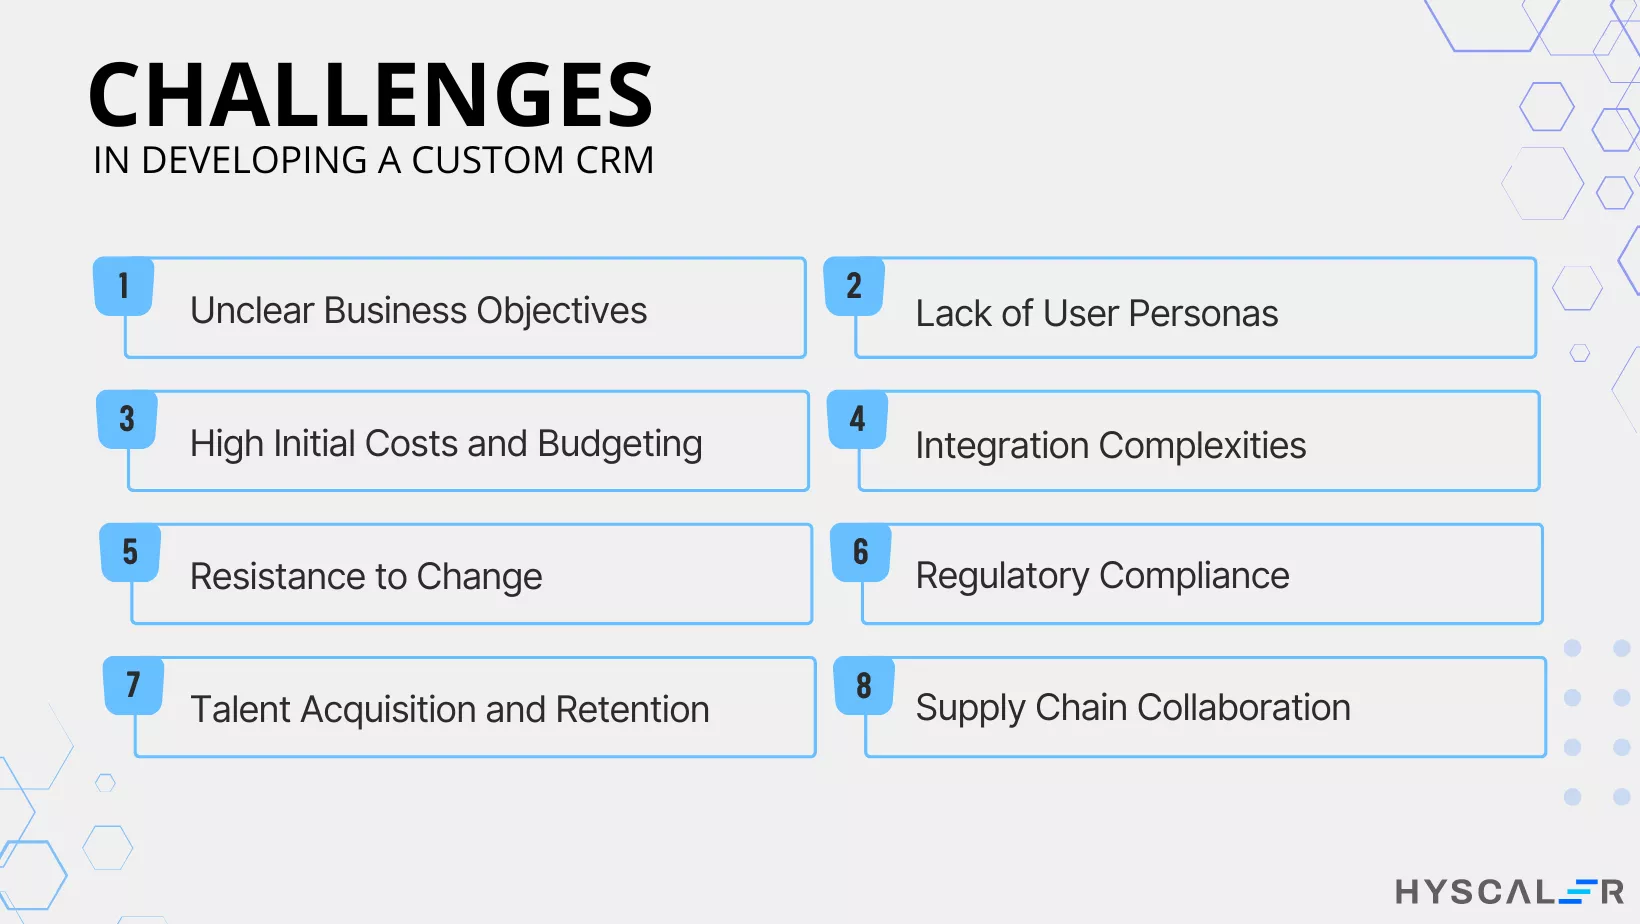 Challenges to build a Custom CRM